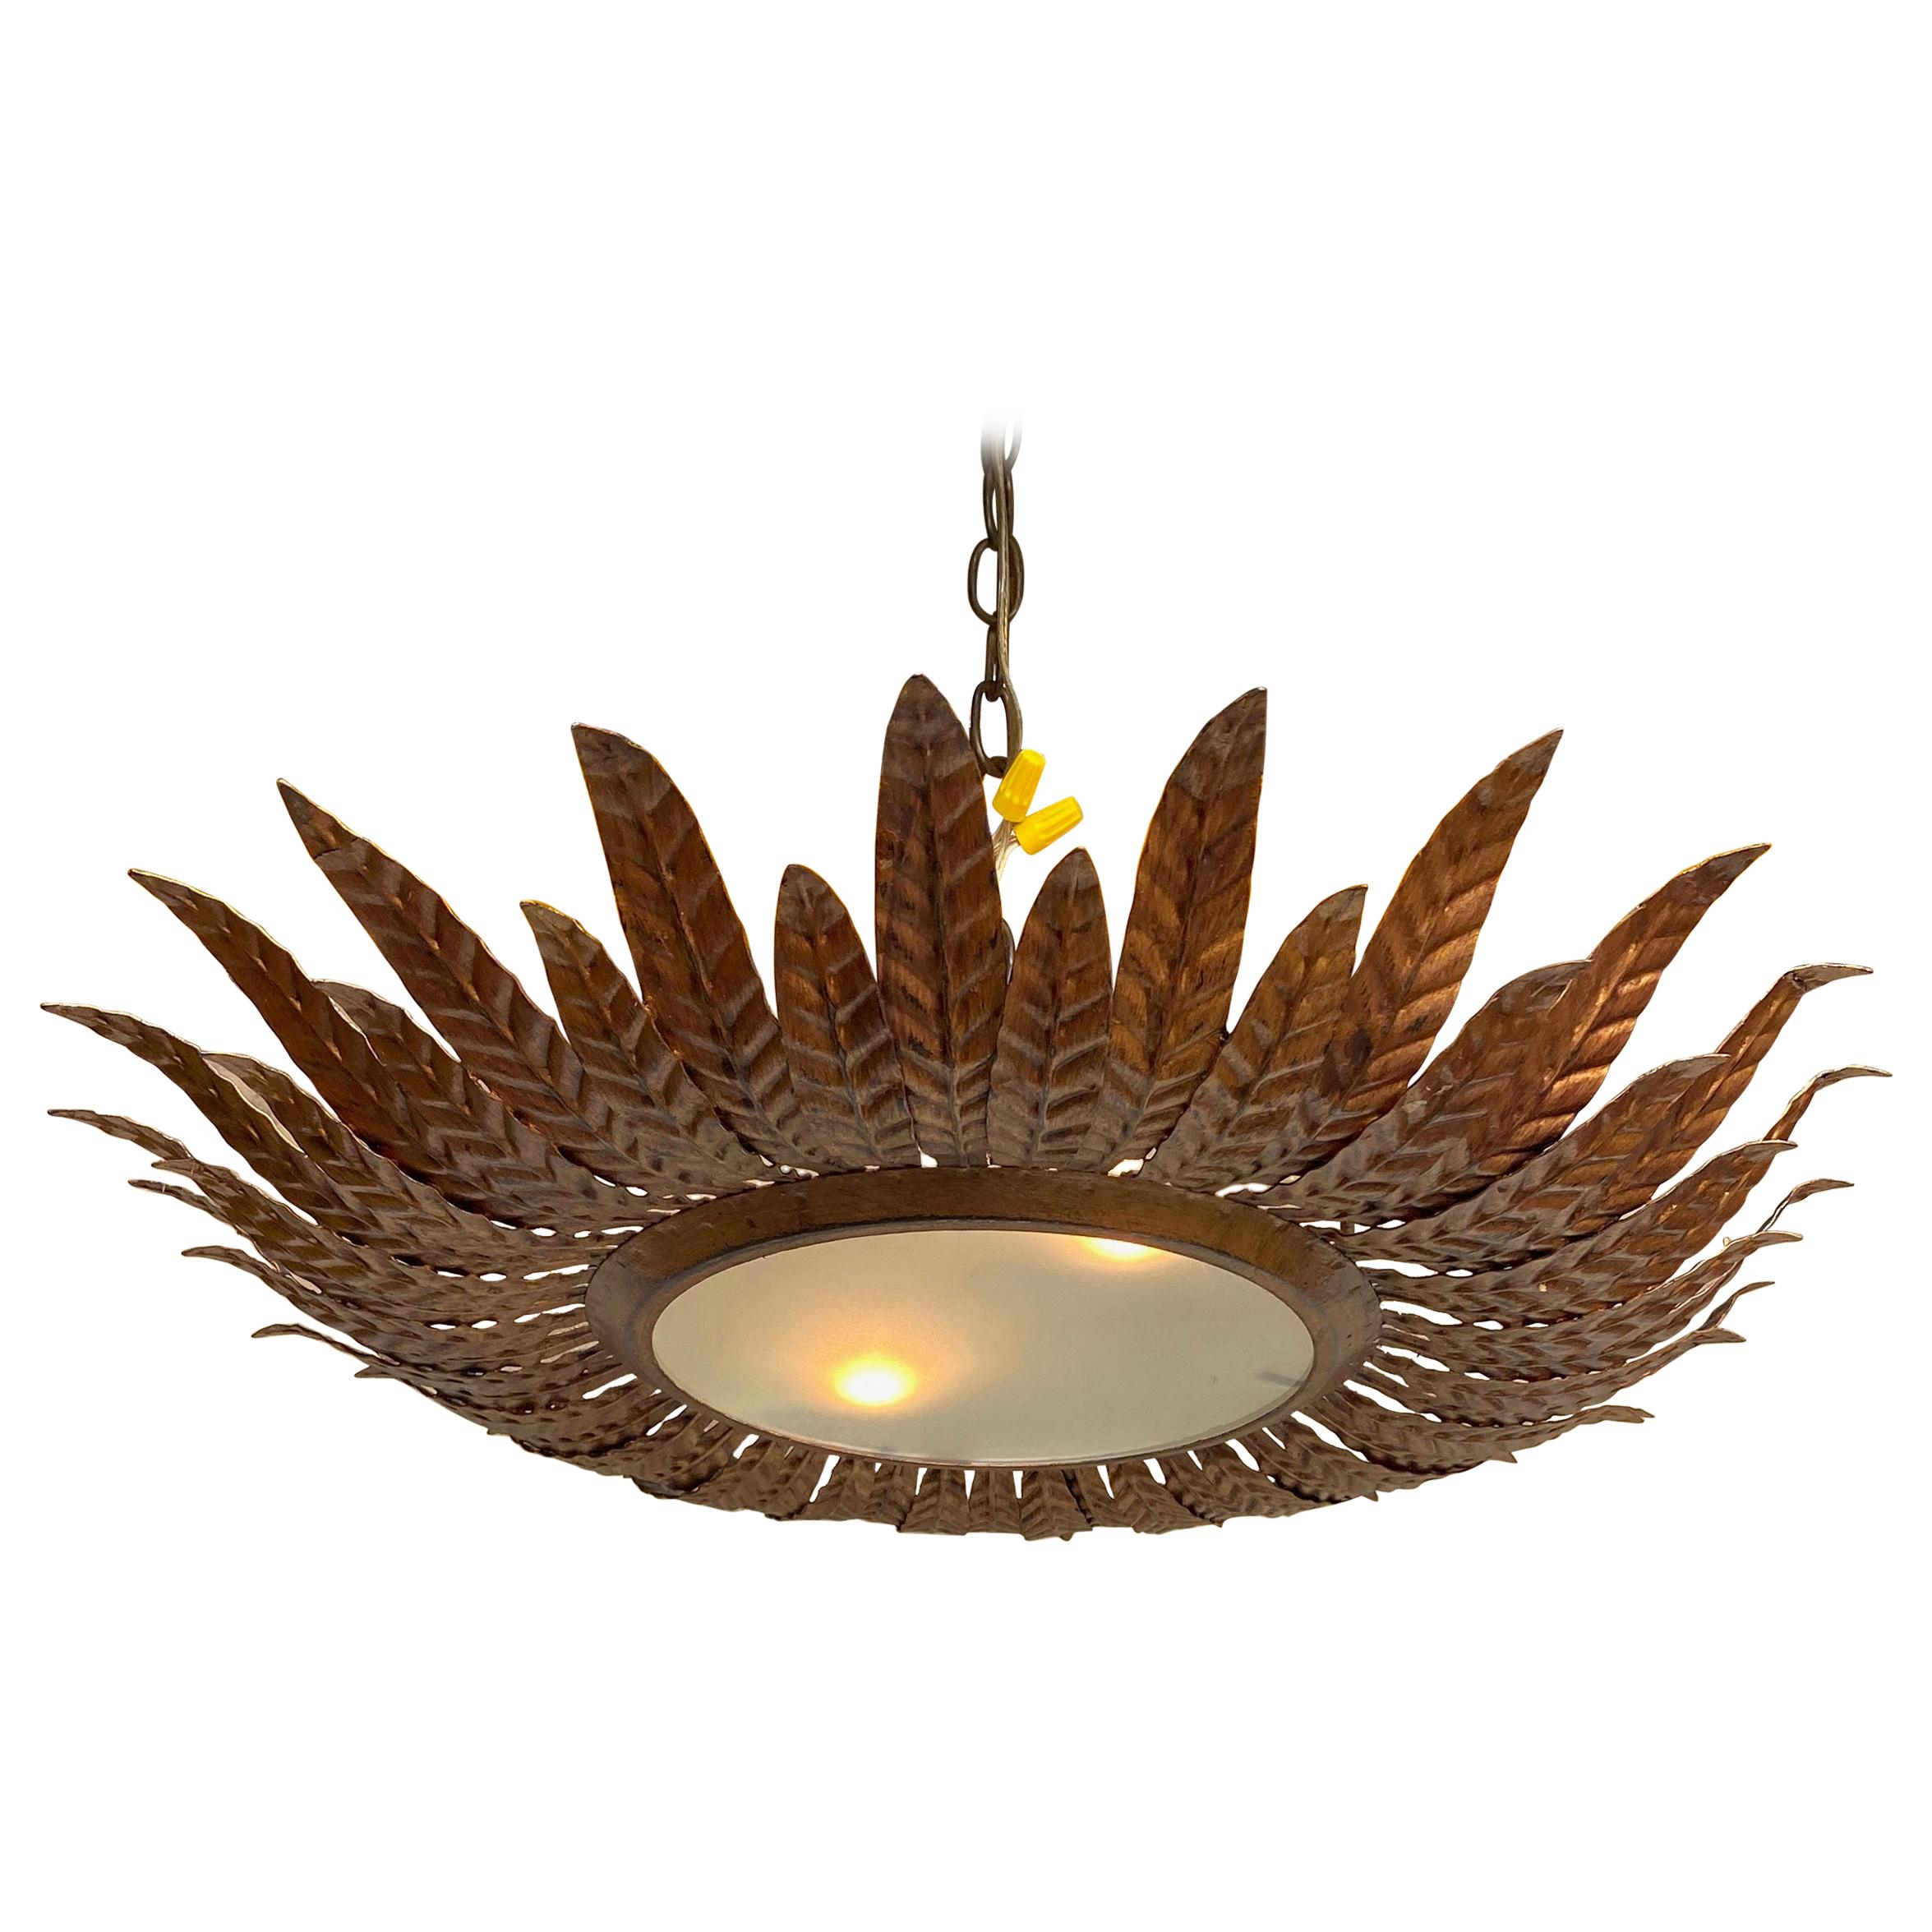 Large Gilt Metal Sunburst Ceiling Fixture with Double Layer Rays